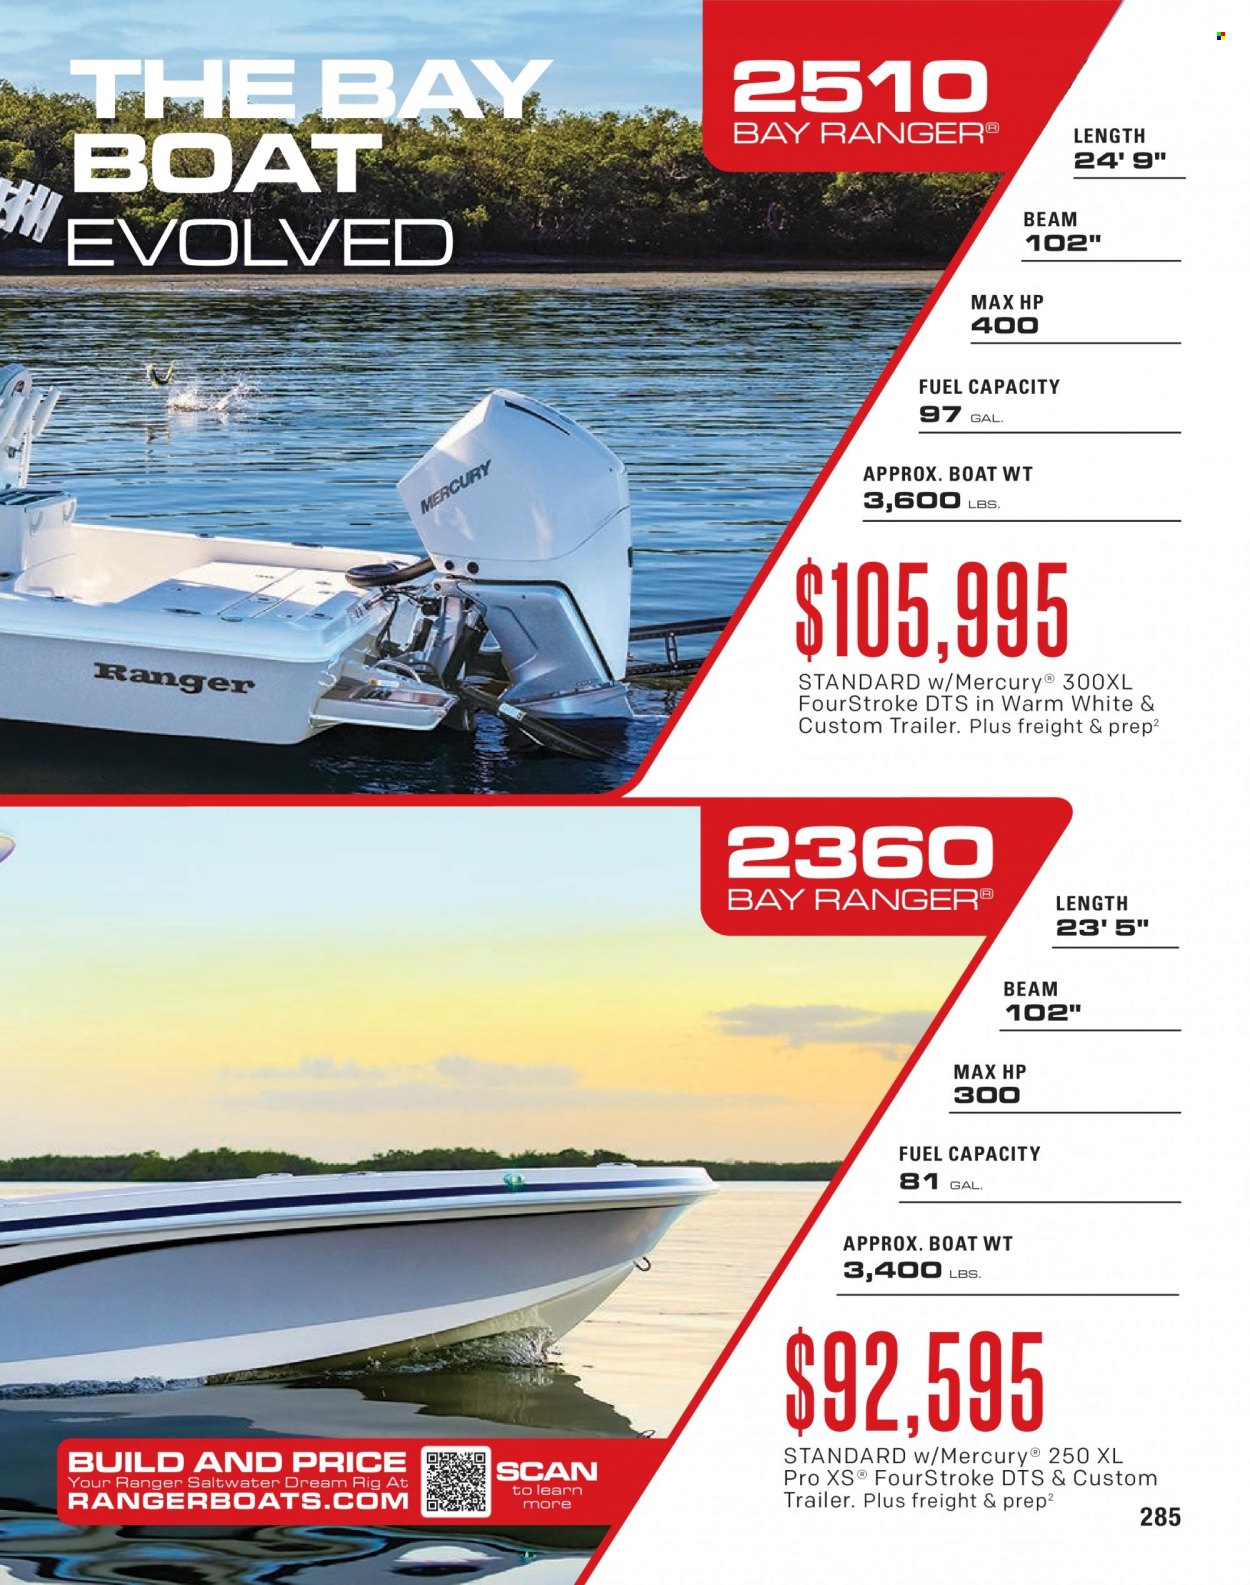 Bass Pro Shops Flyer - Sales products - Hewlett Packard, boat. Page 285.